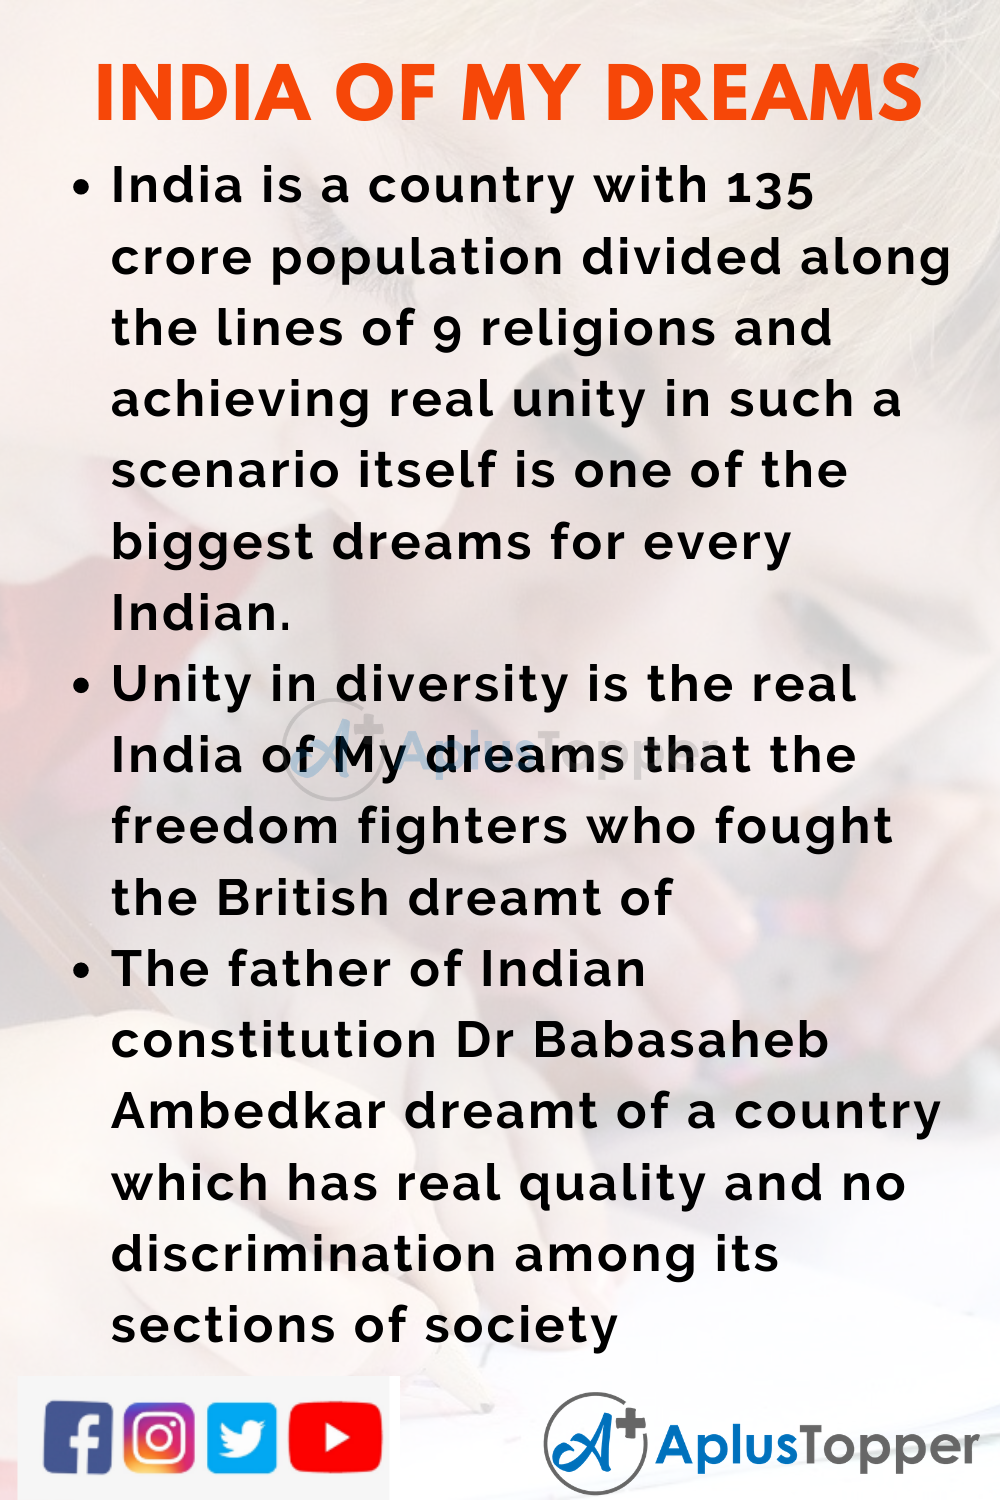 India of My Dreams Essay - Javatpoint